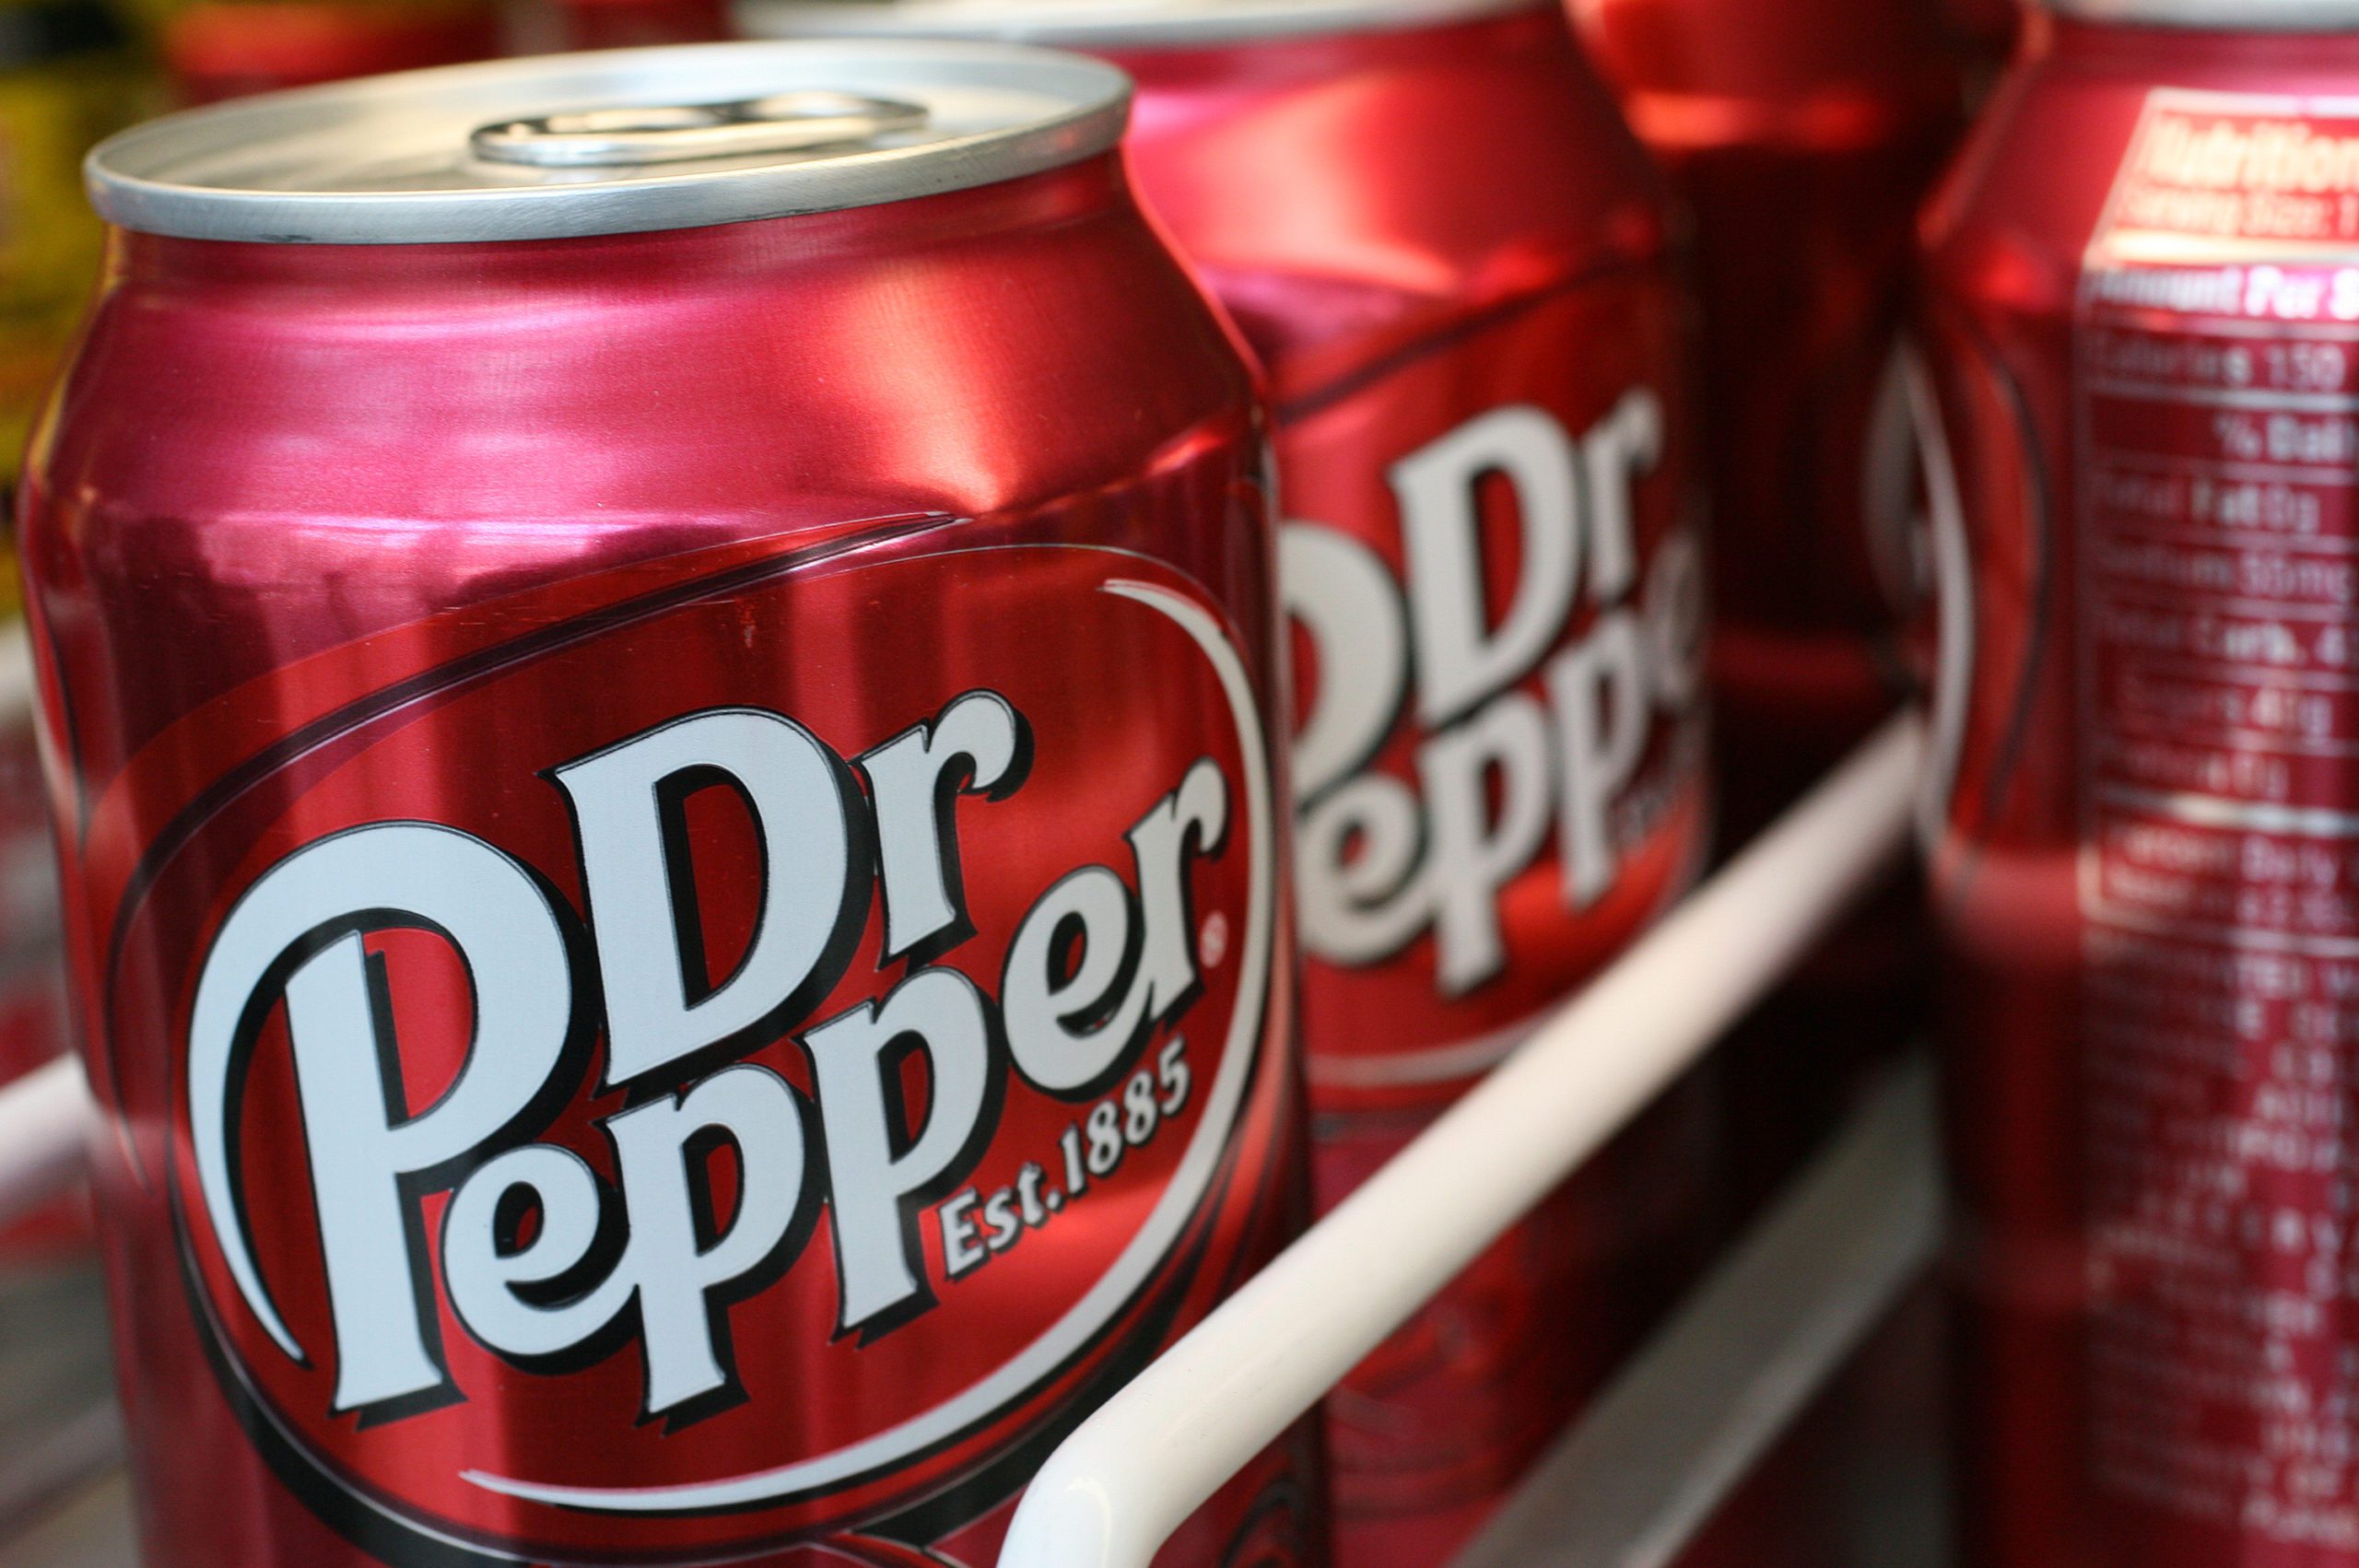 Is Dr Pepper A Pepsi Product?